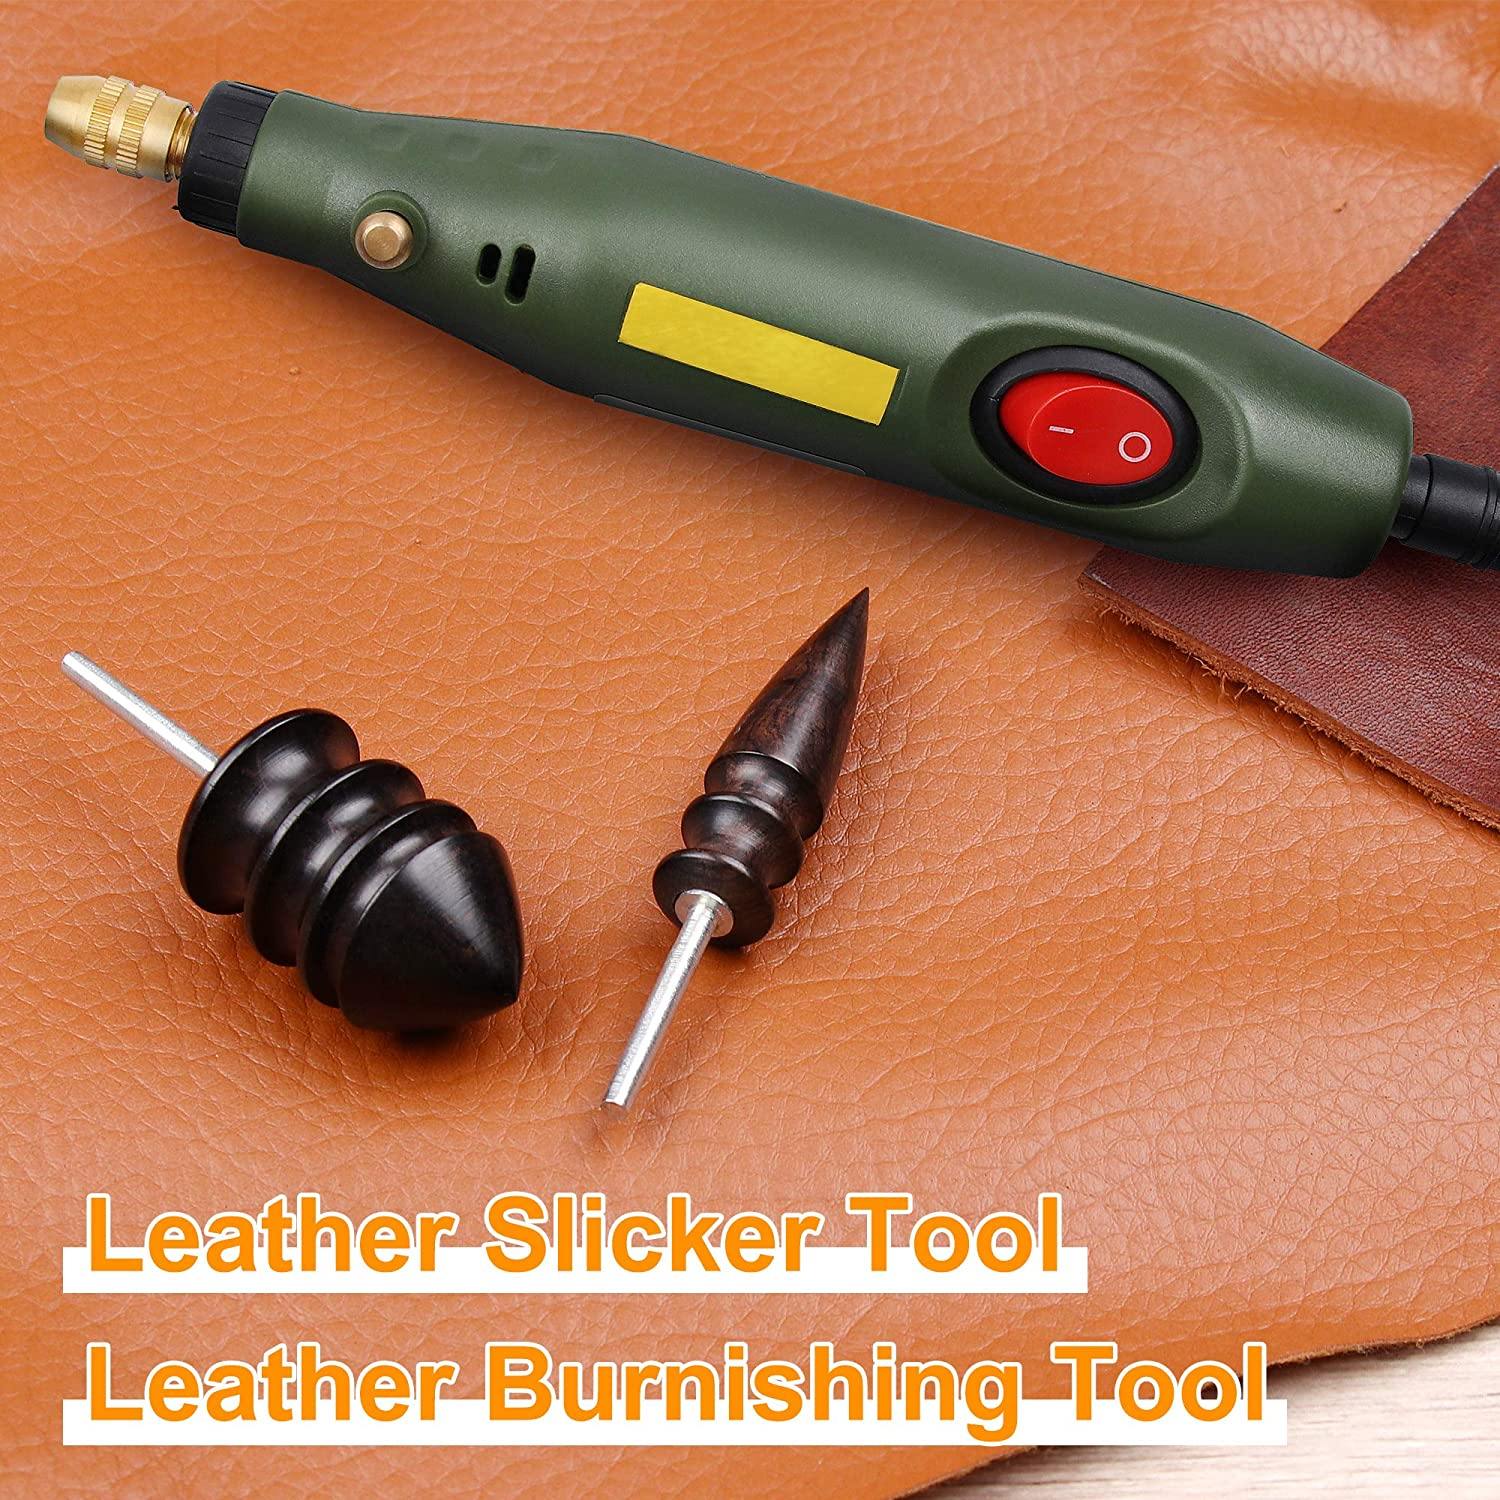 Leather Burnisher,Knoweasy Leather Slicker Tool and Leather